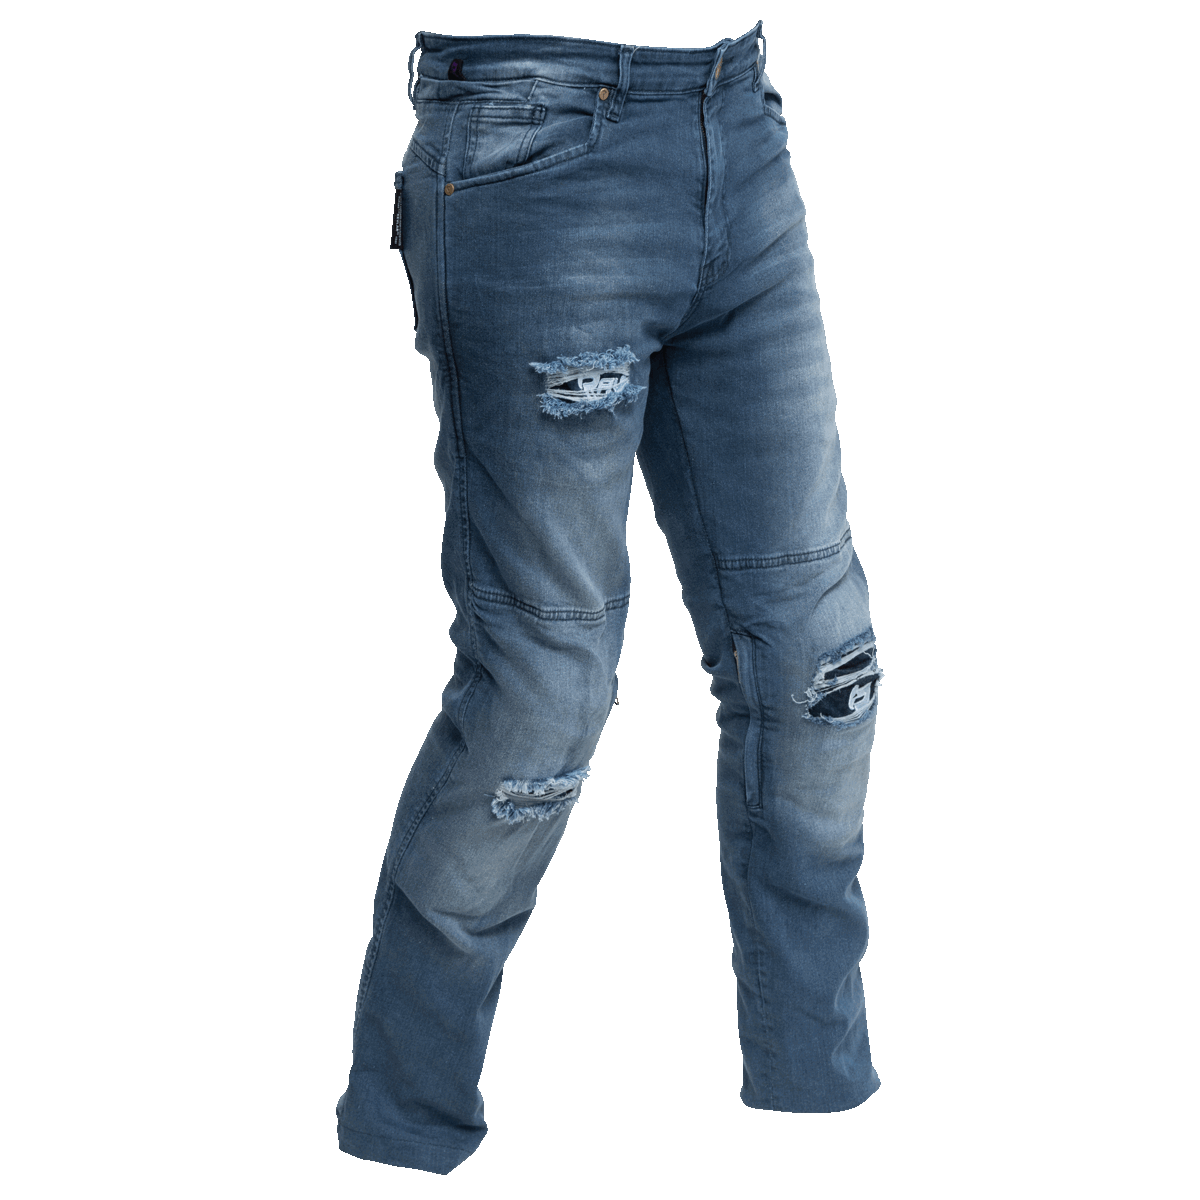 Verdensrekord Guinness Book Prevail angst RAVEN Moto - Motorcycle Jeans | REVOLT Ripped Armored Jeans